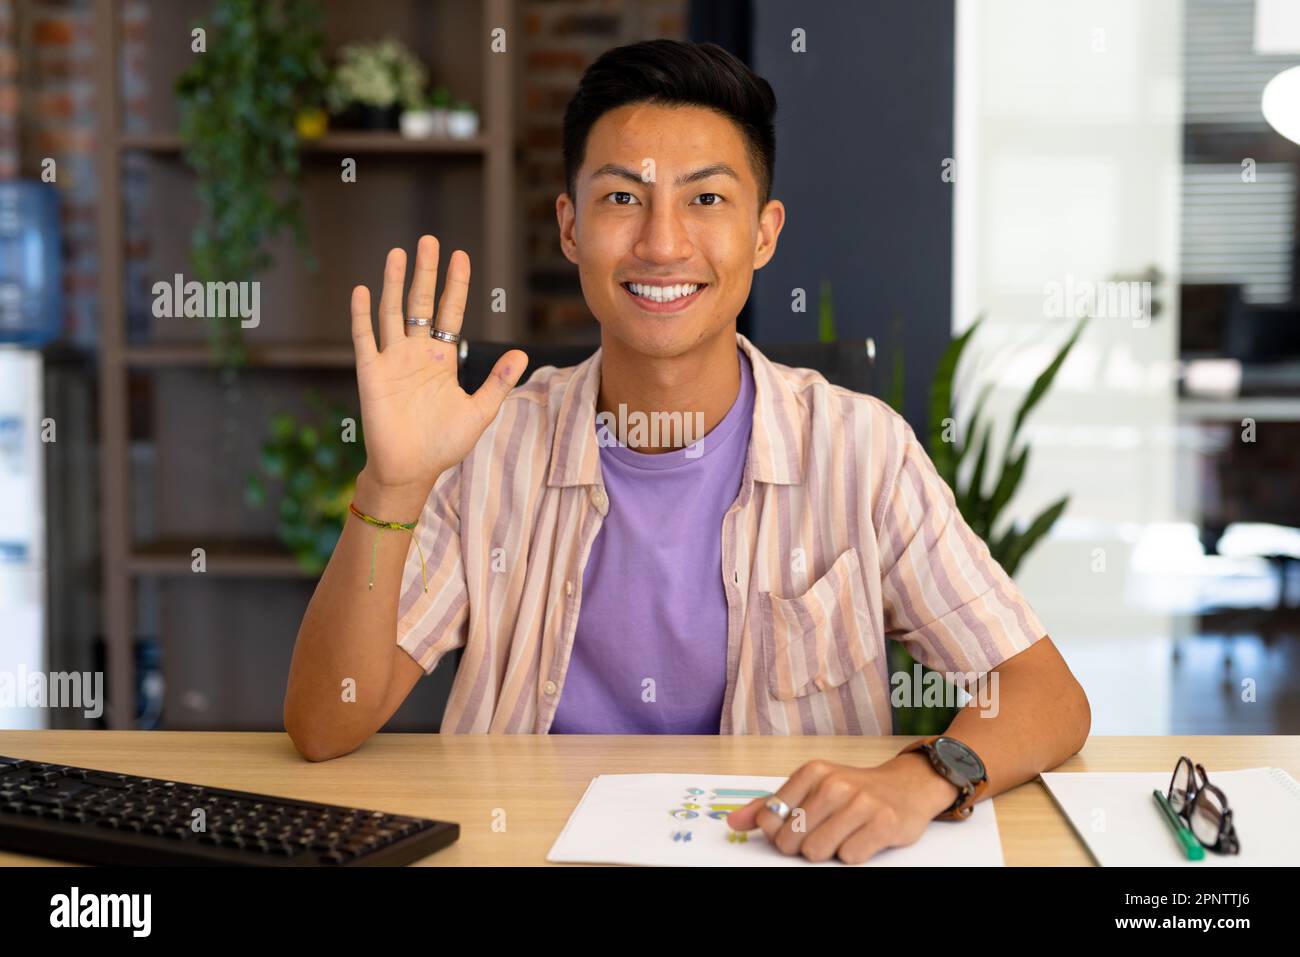 Portrait of happy asian casual businessman making video call smiling and waving Stock Photo